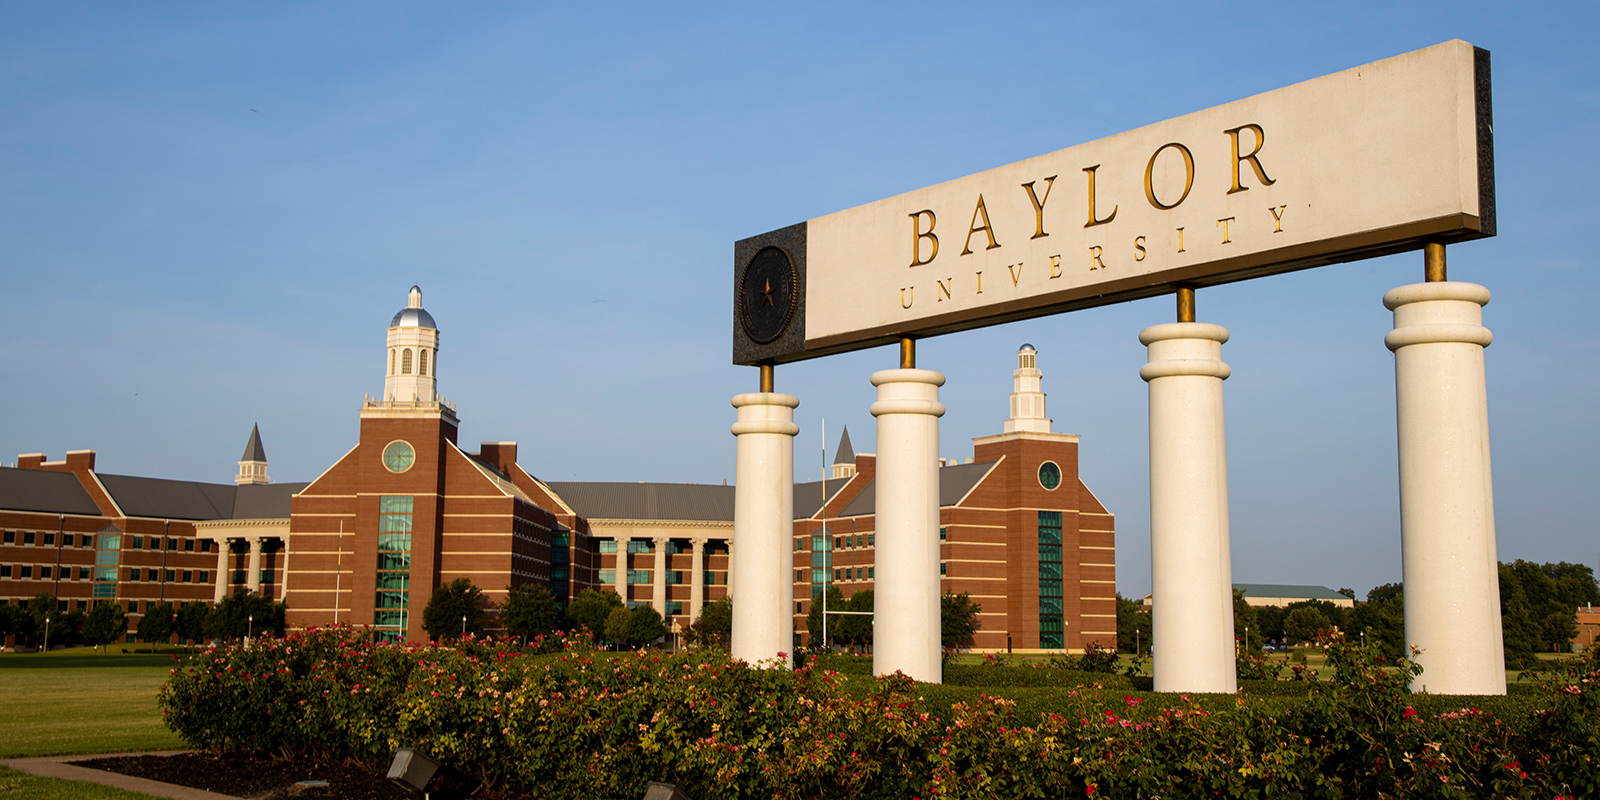 Baylor university's campus sign "pictured here"